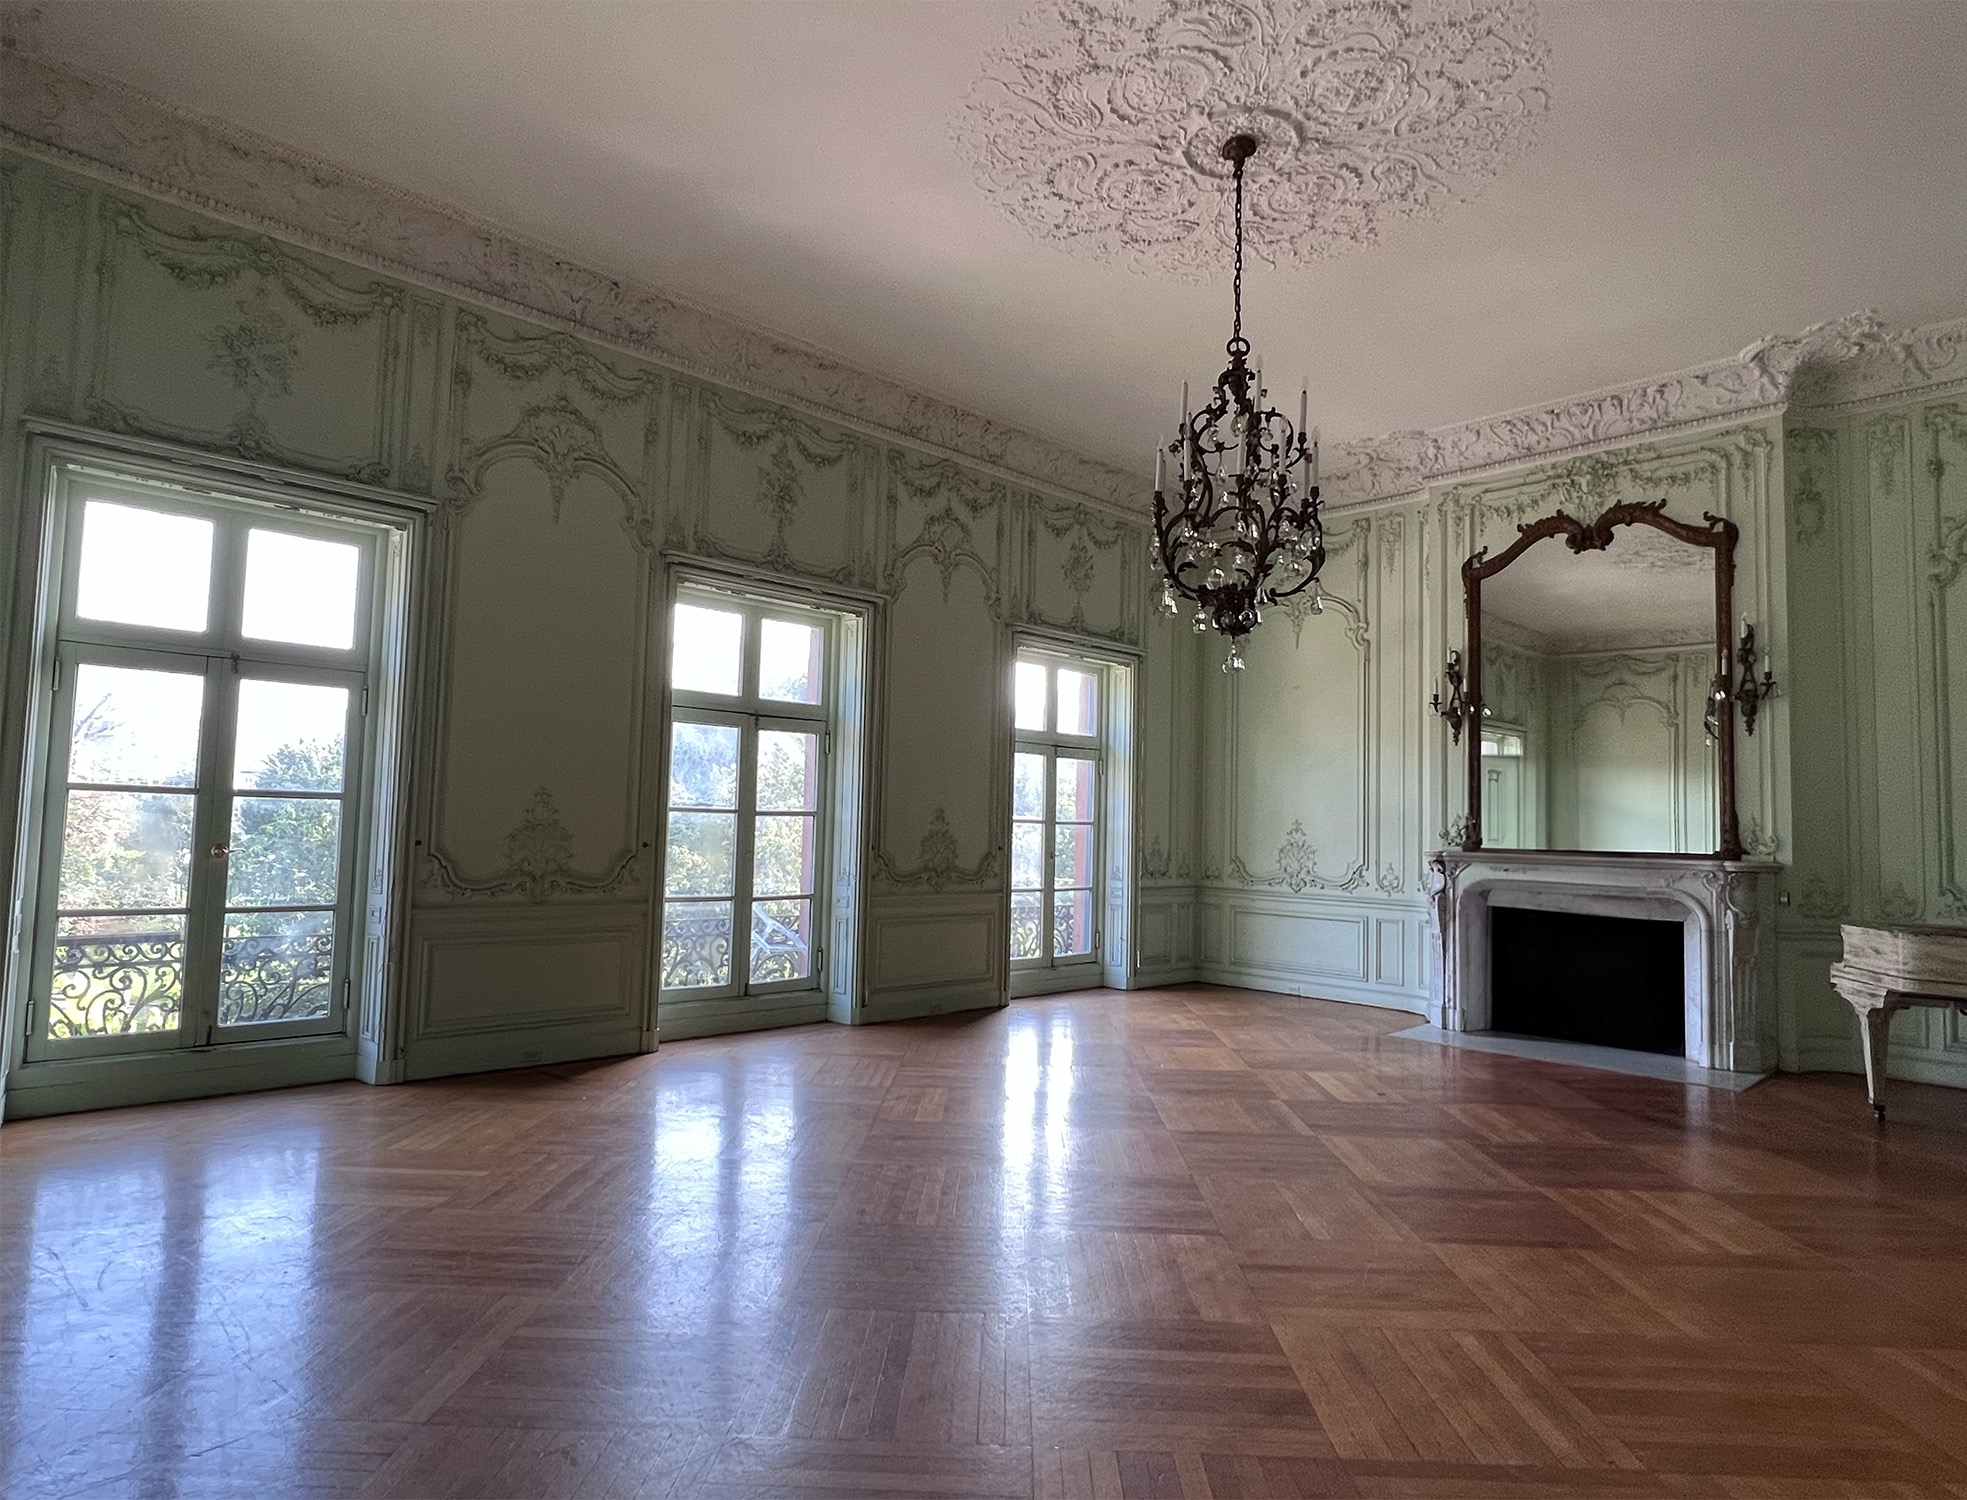 The French Room